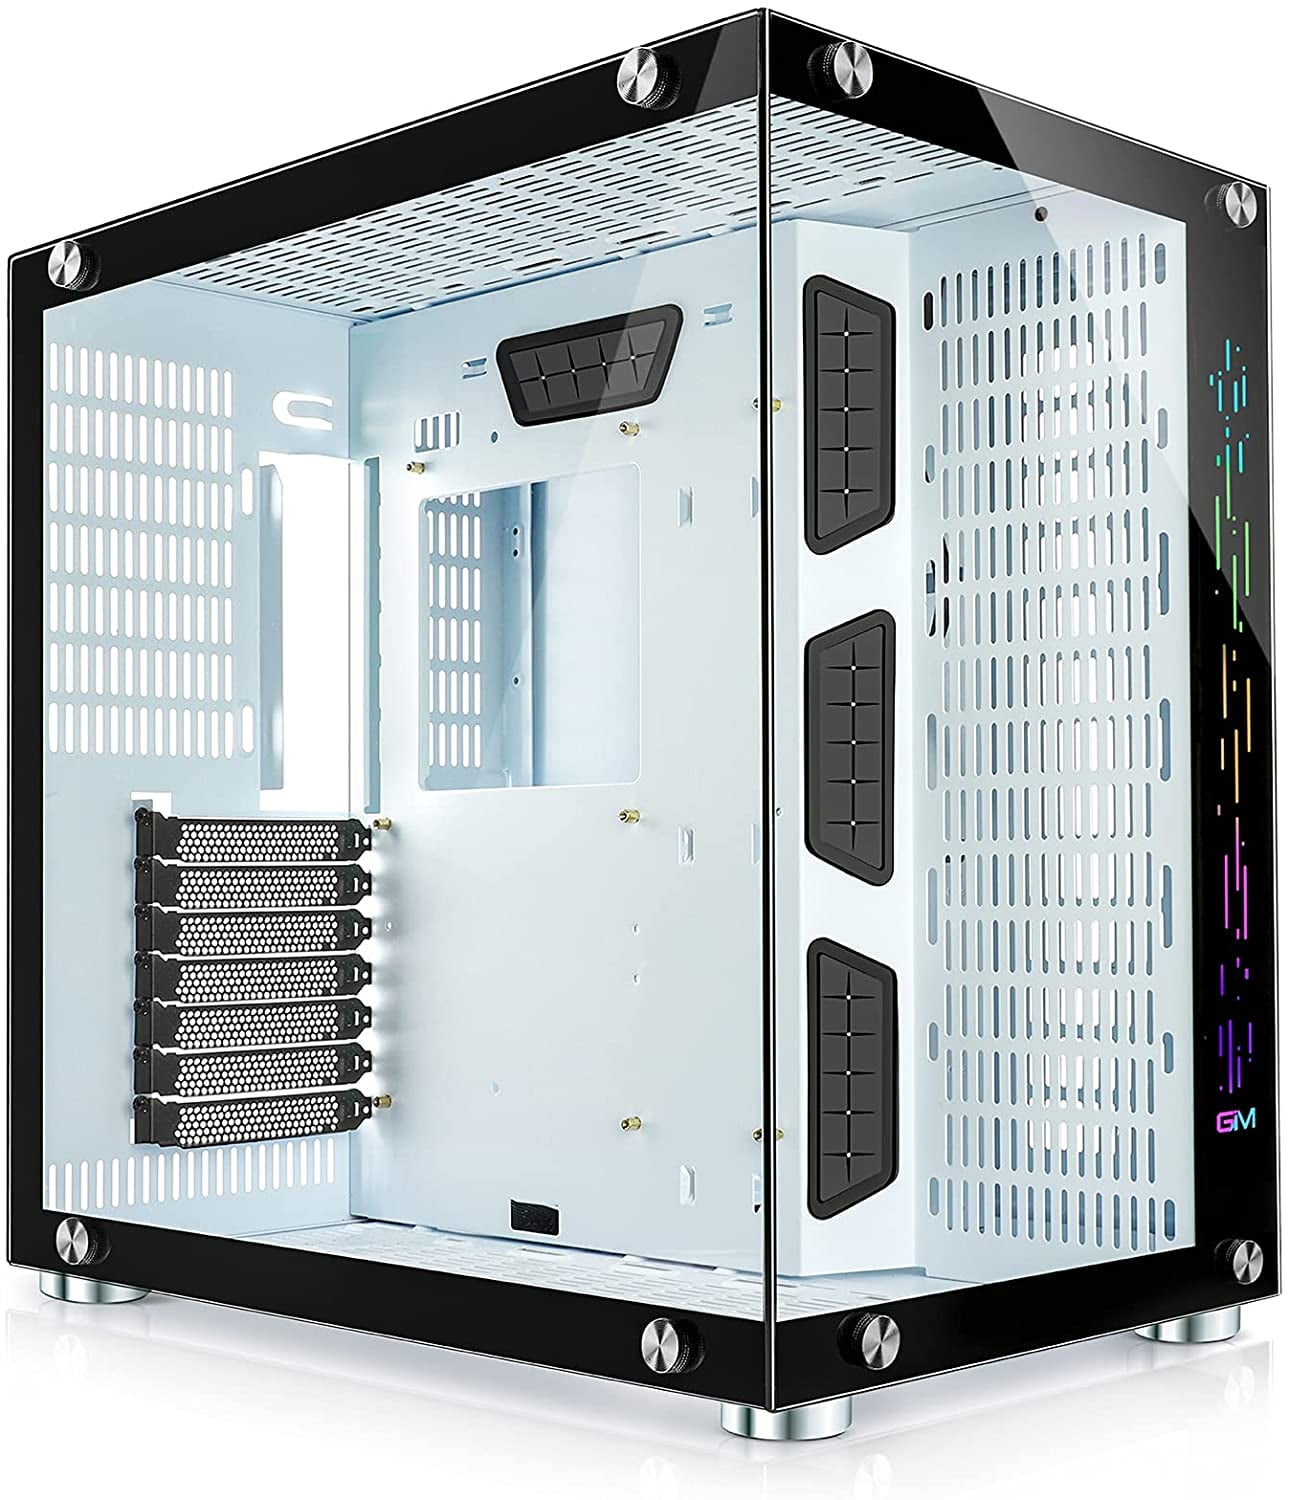 Micro ATX Computer Case Mini Tower Gaming Desktop PC with USB 3.0 120mm Fan 